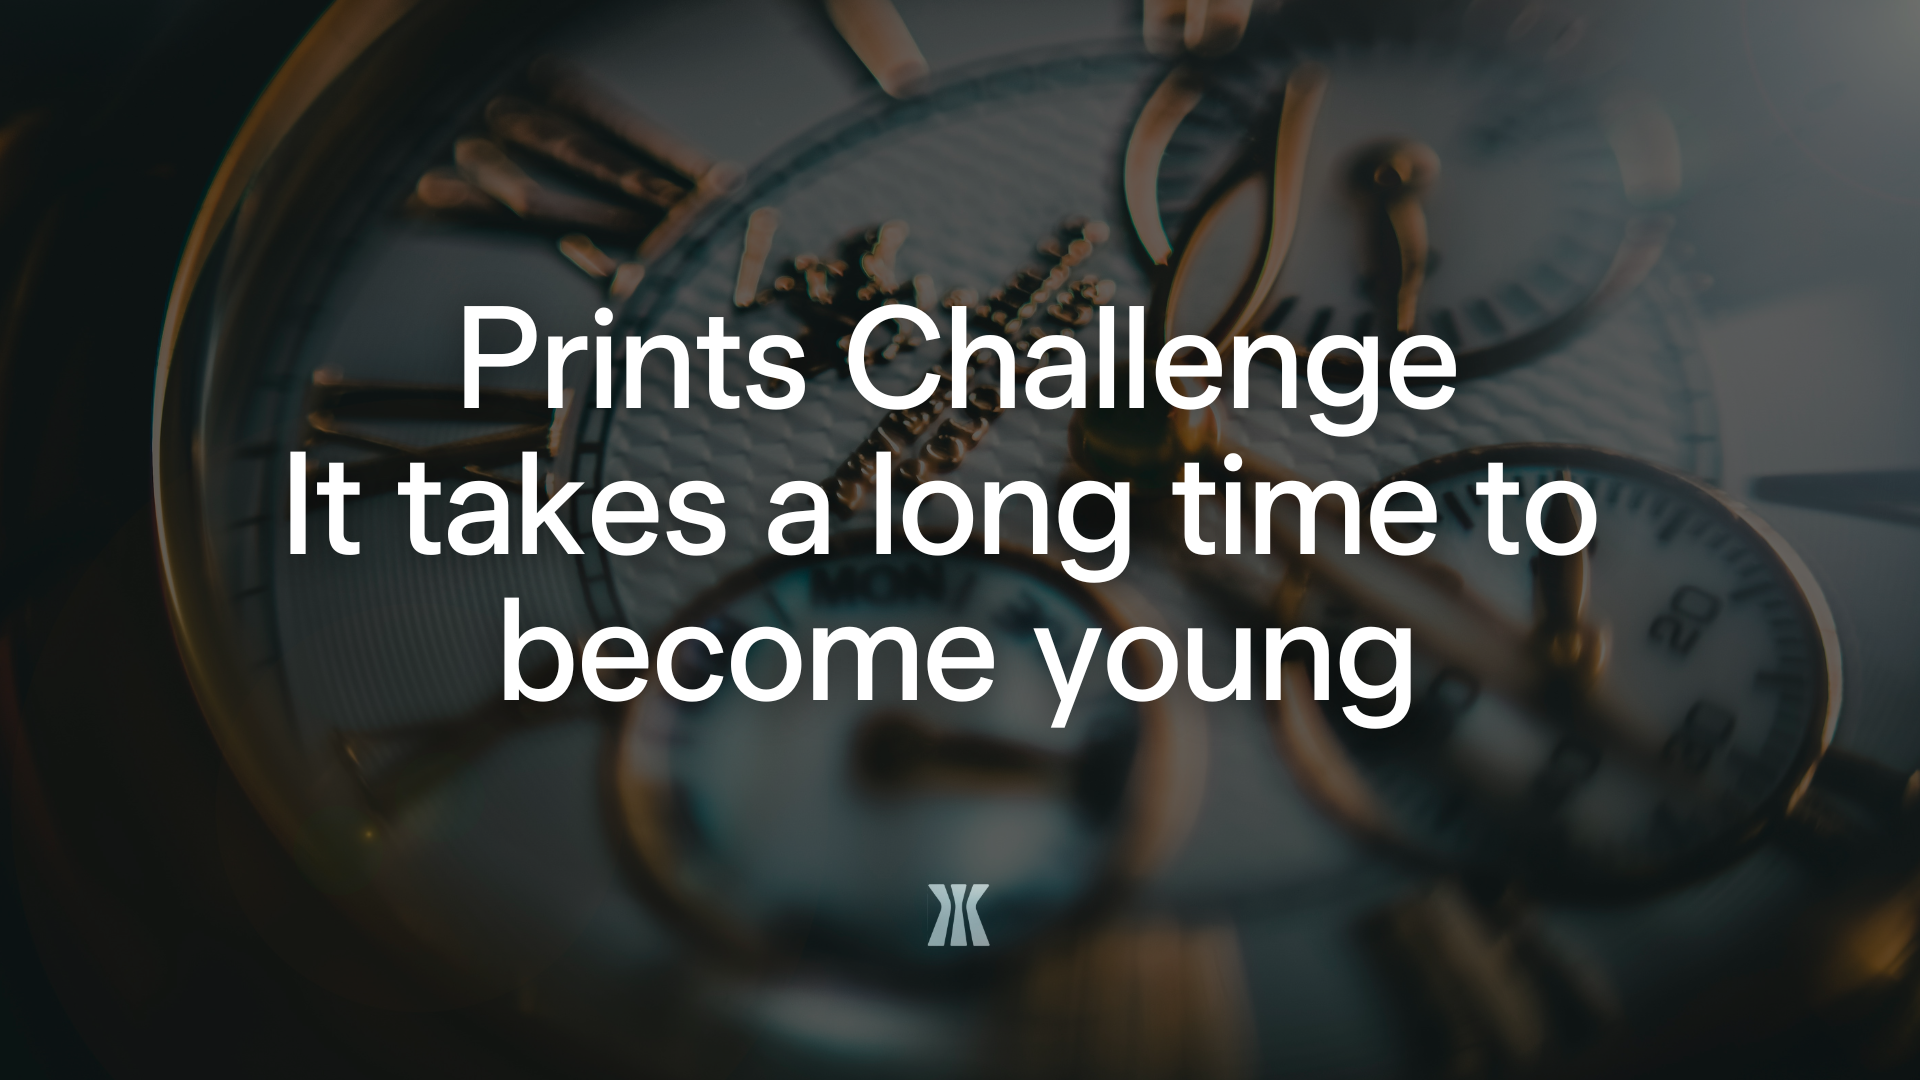 Prints Challenge: It takes a long time to become young